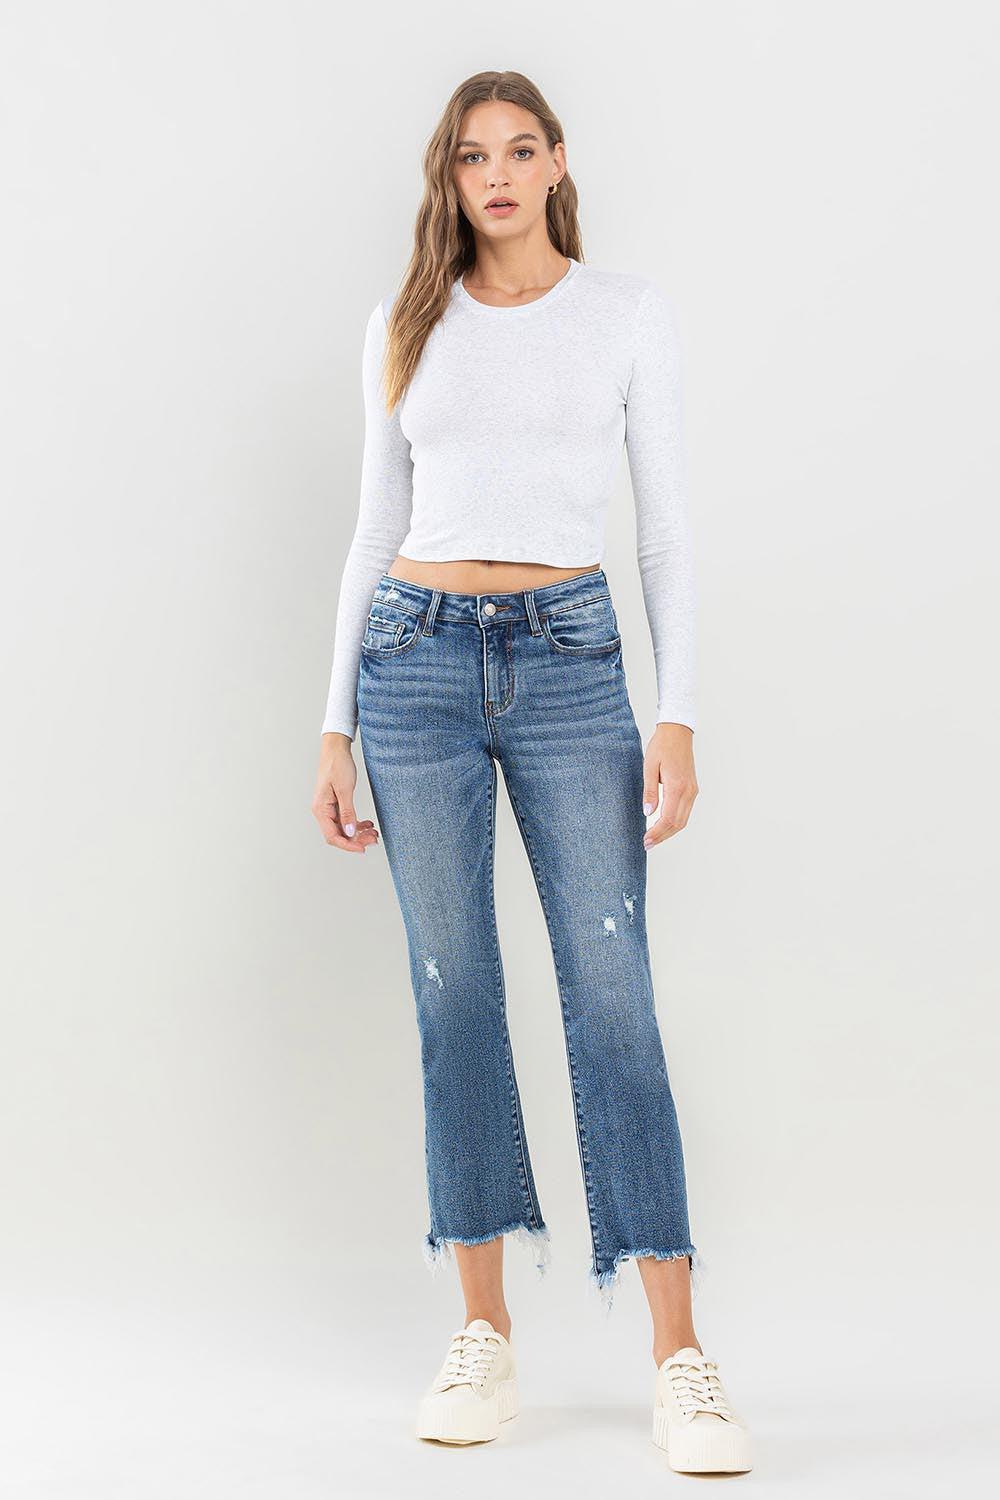 a woman in a white top and jeans